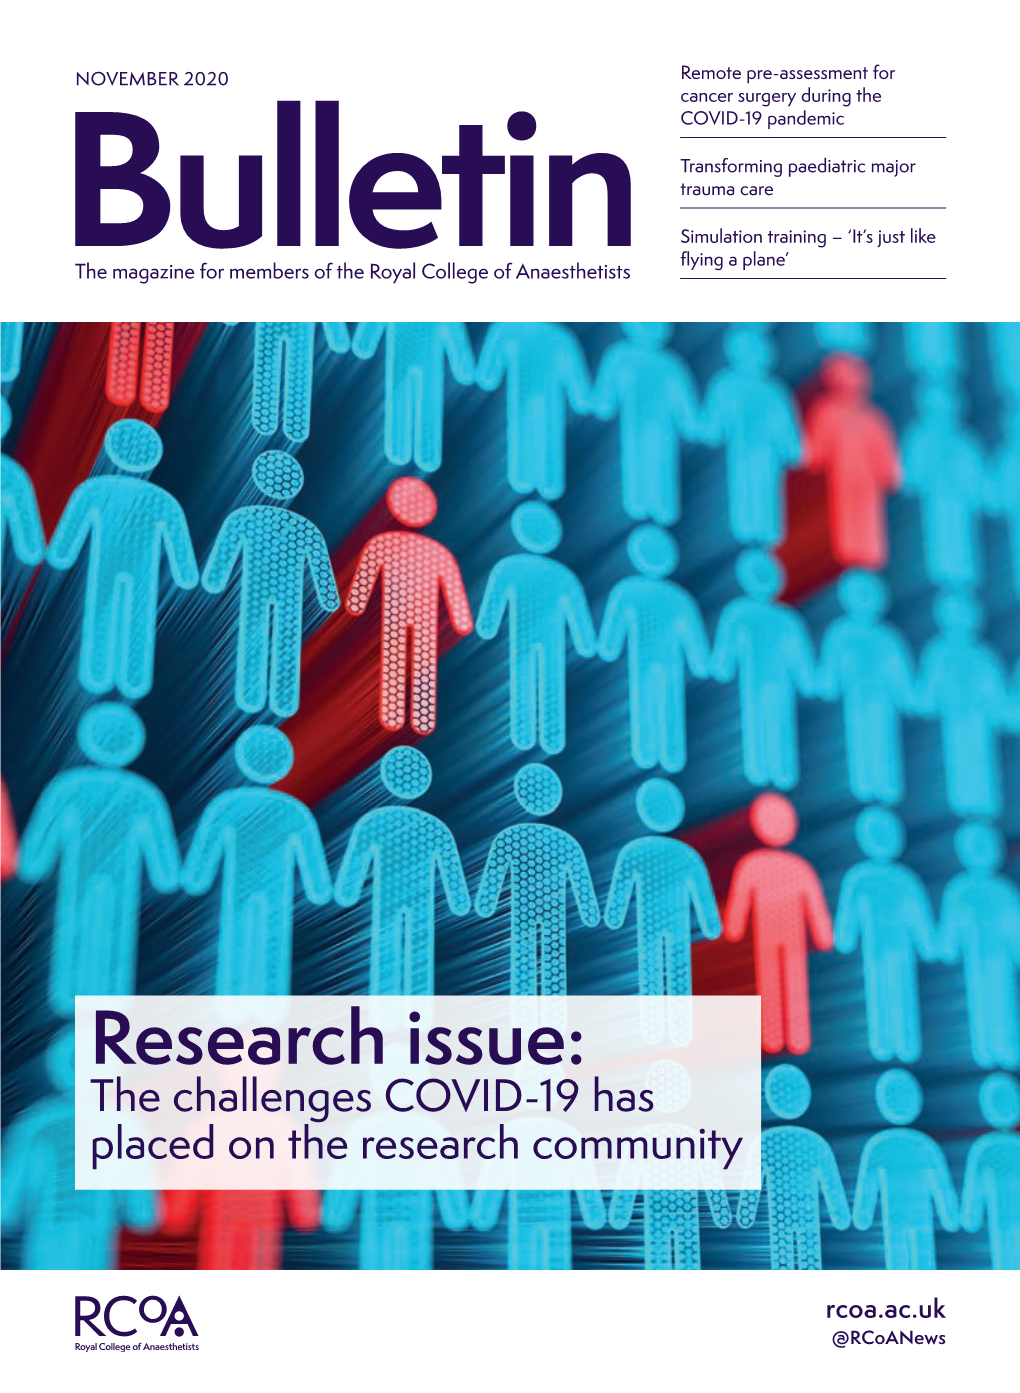 Research Issue: the Challenges COVID-19 Has Placed on the Research Community